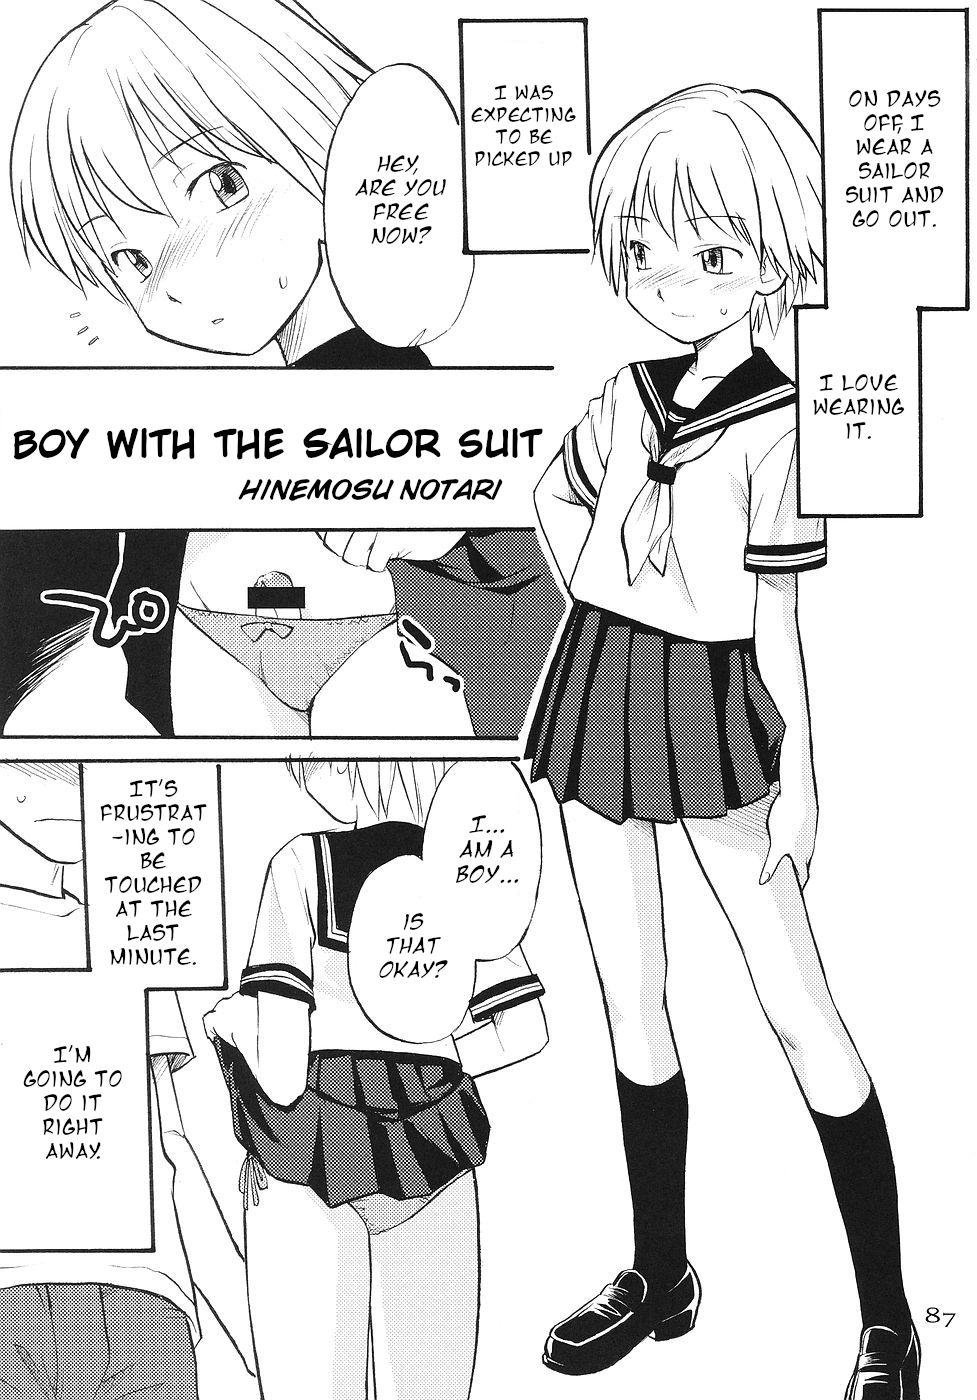 All Boy with the Sailor Suit Stepmom - Page 1